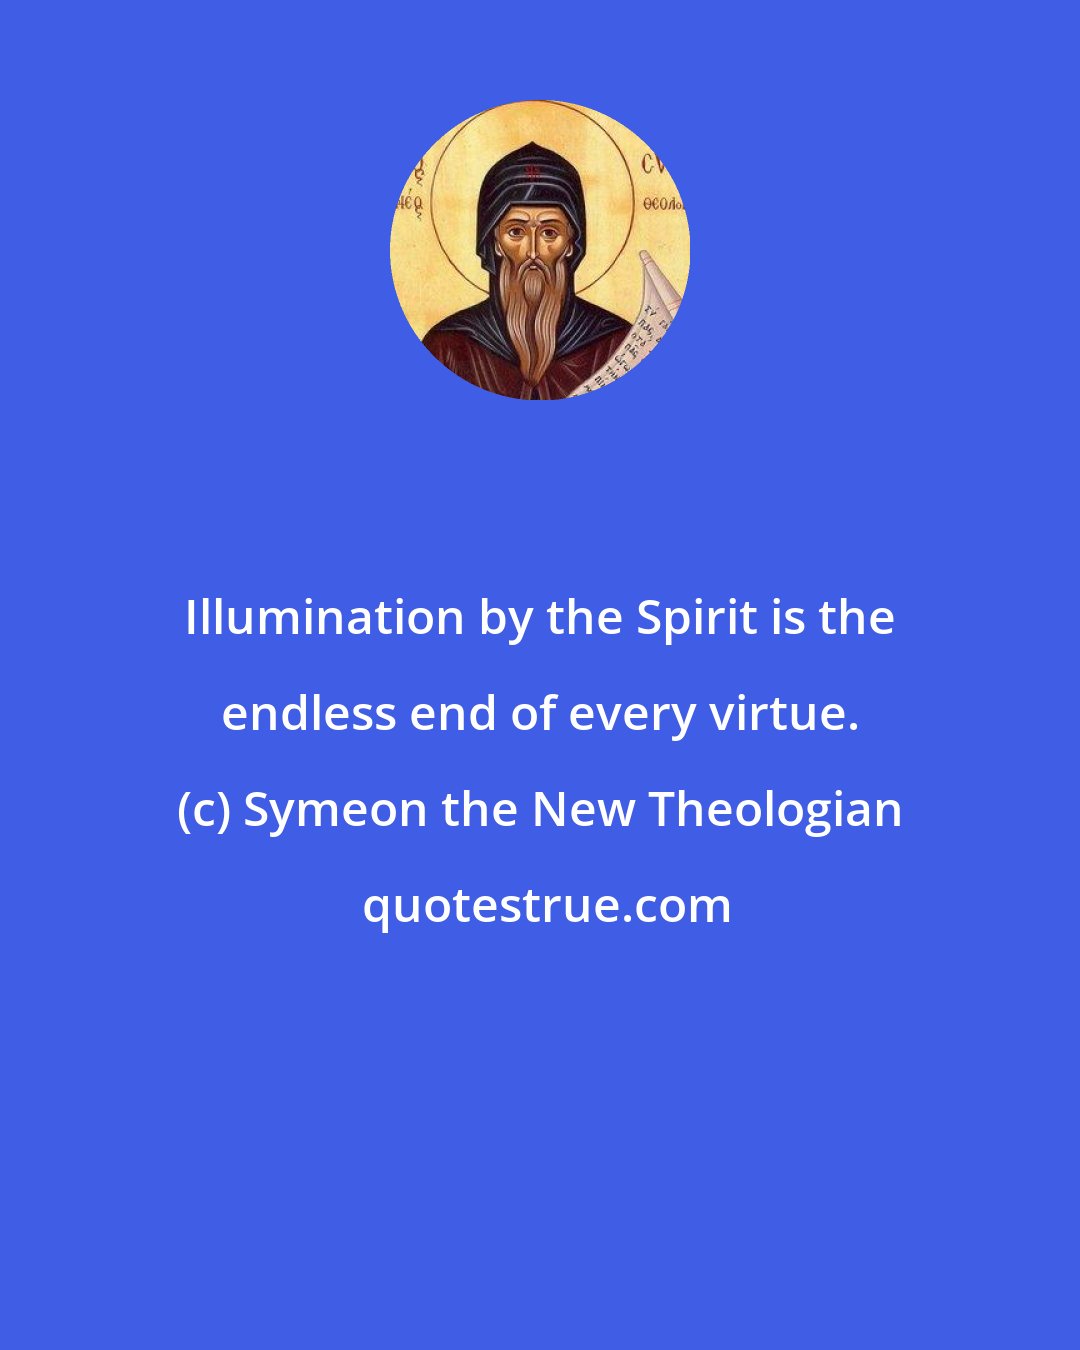 Symeon the New Theologian: Illumination by the Spirit is the endless end of every virtue.